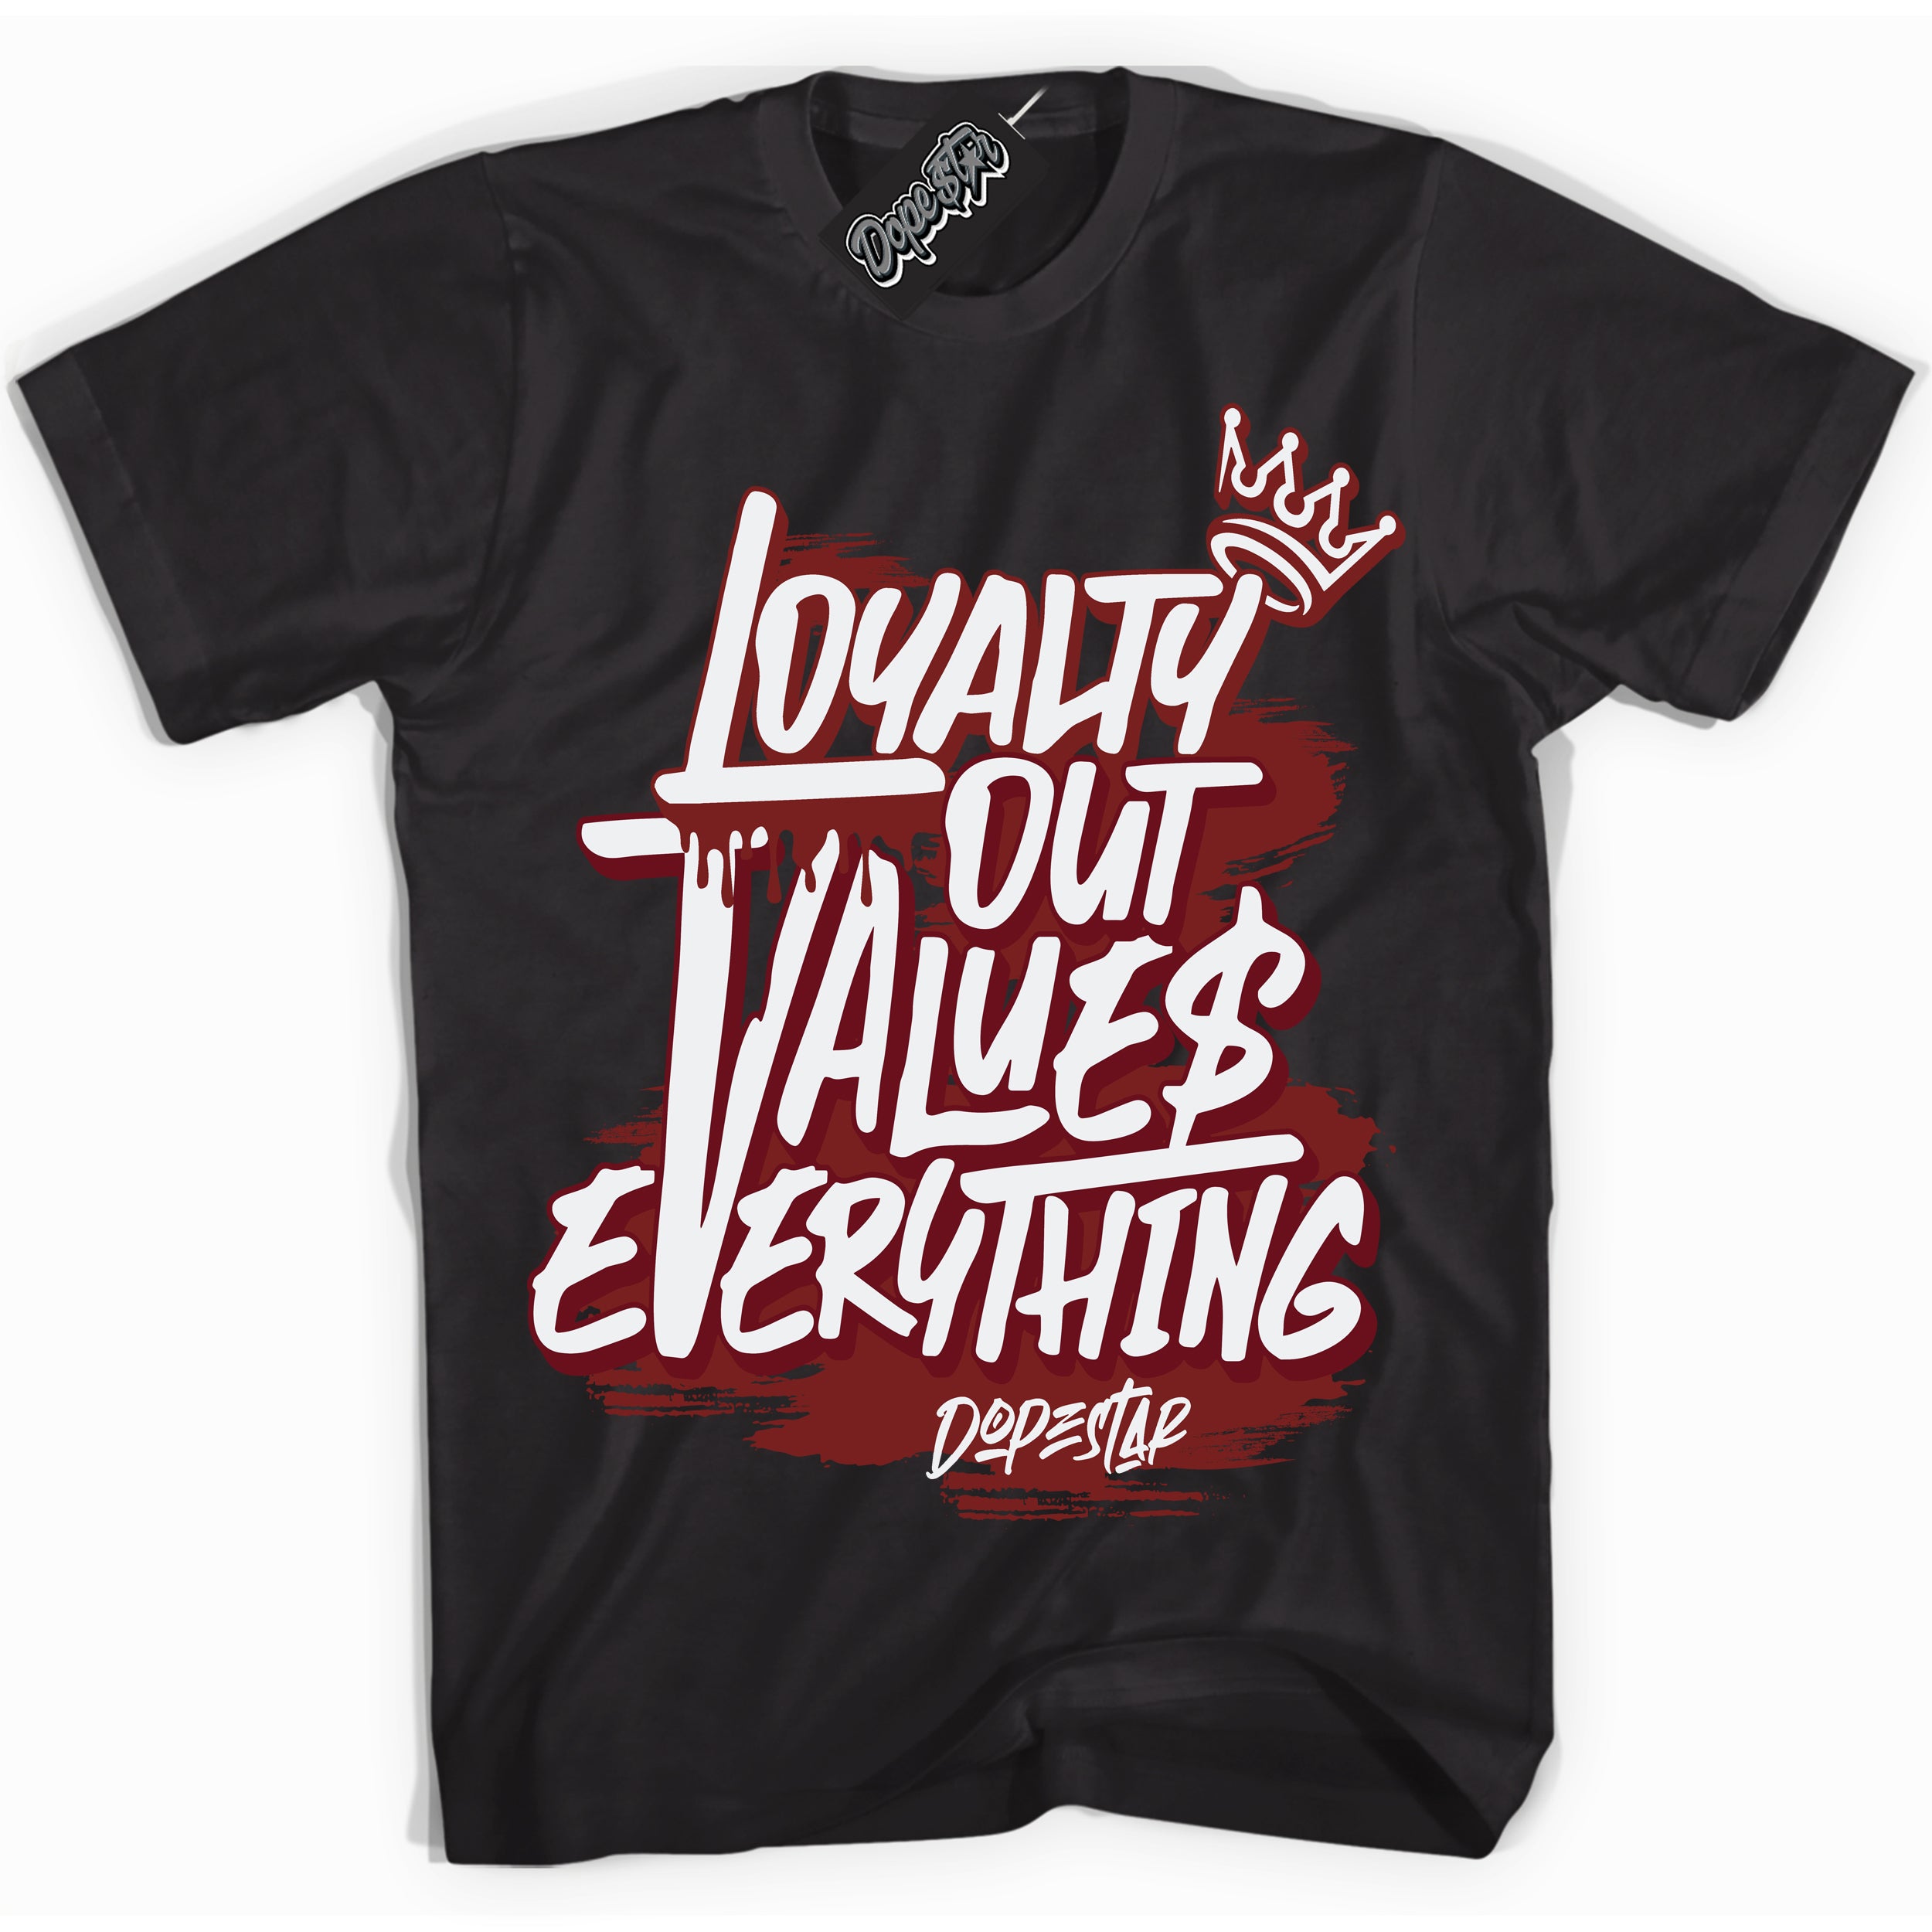 Cool Black Shirt with “ Loyalty Out Values Everything” design that perfectly matches Dune Red 1s Sneakers.